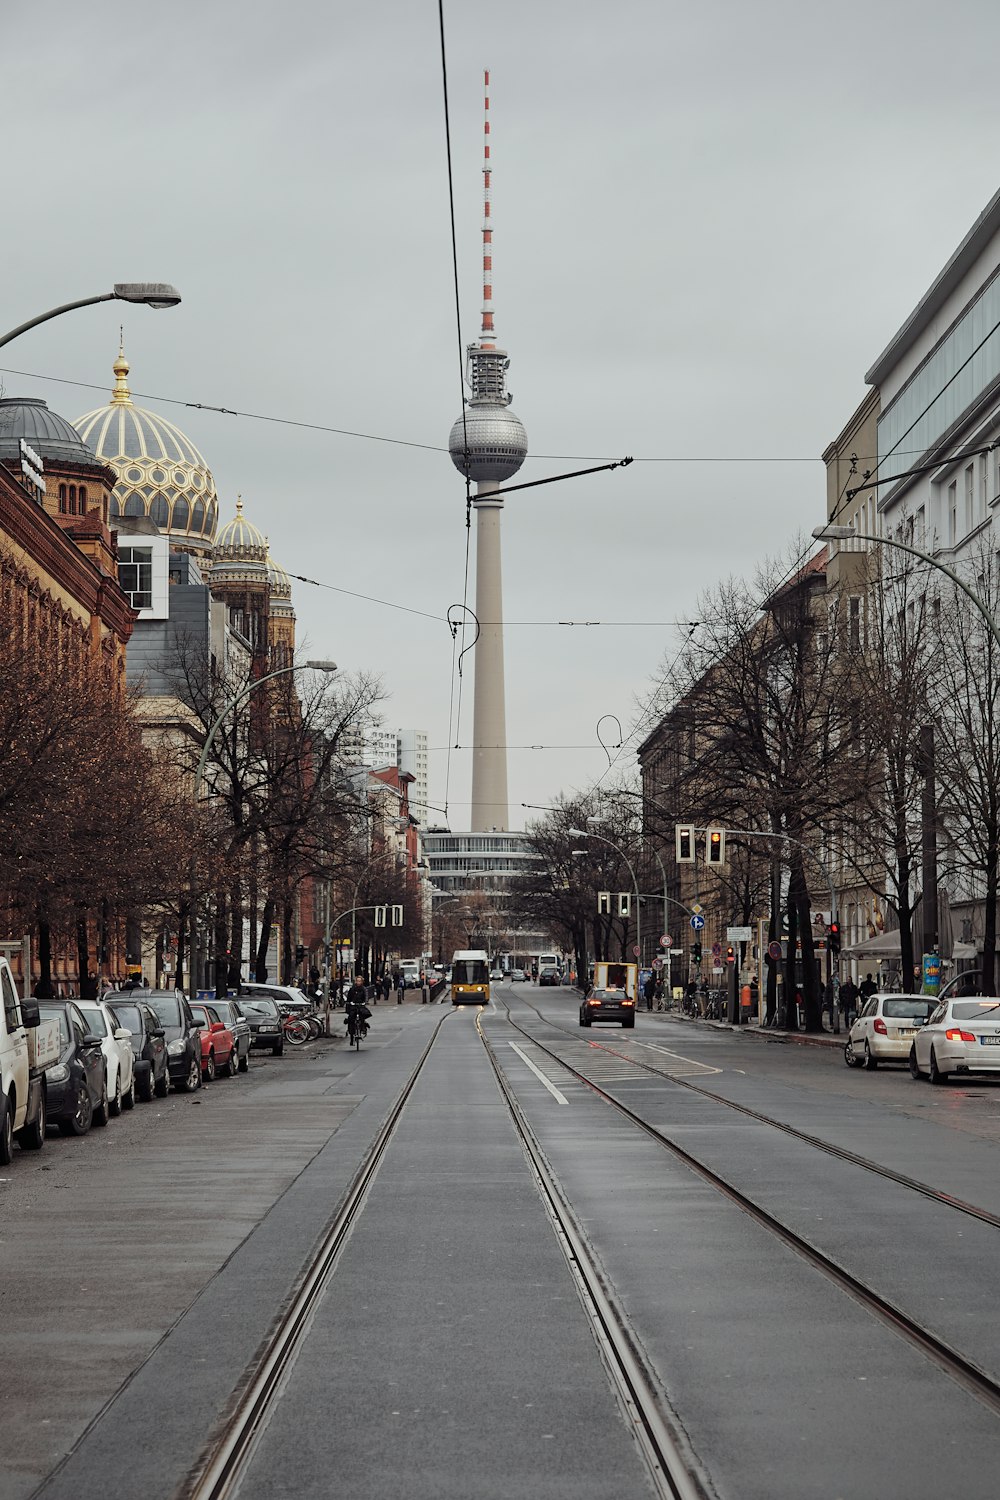 a street with cars parked on both sides and a television tower in the background